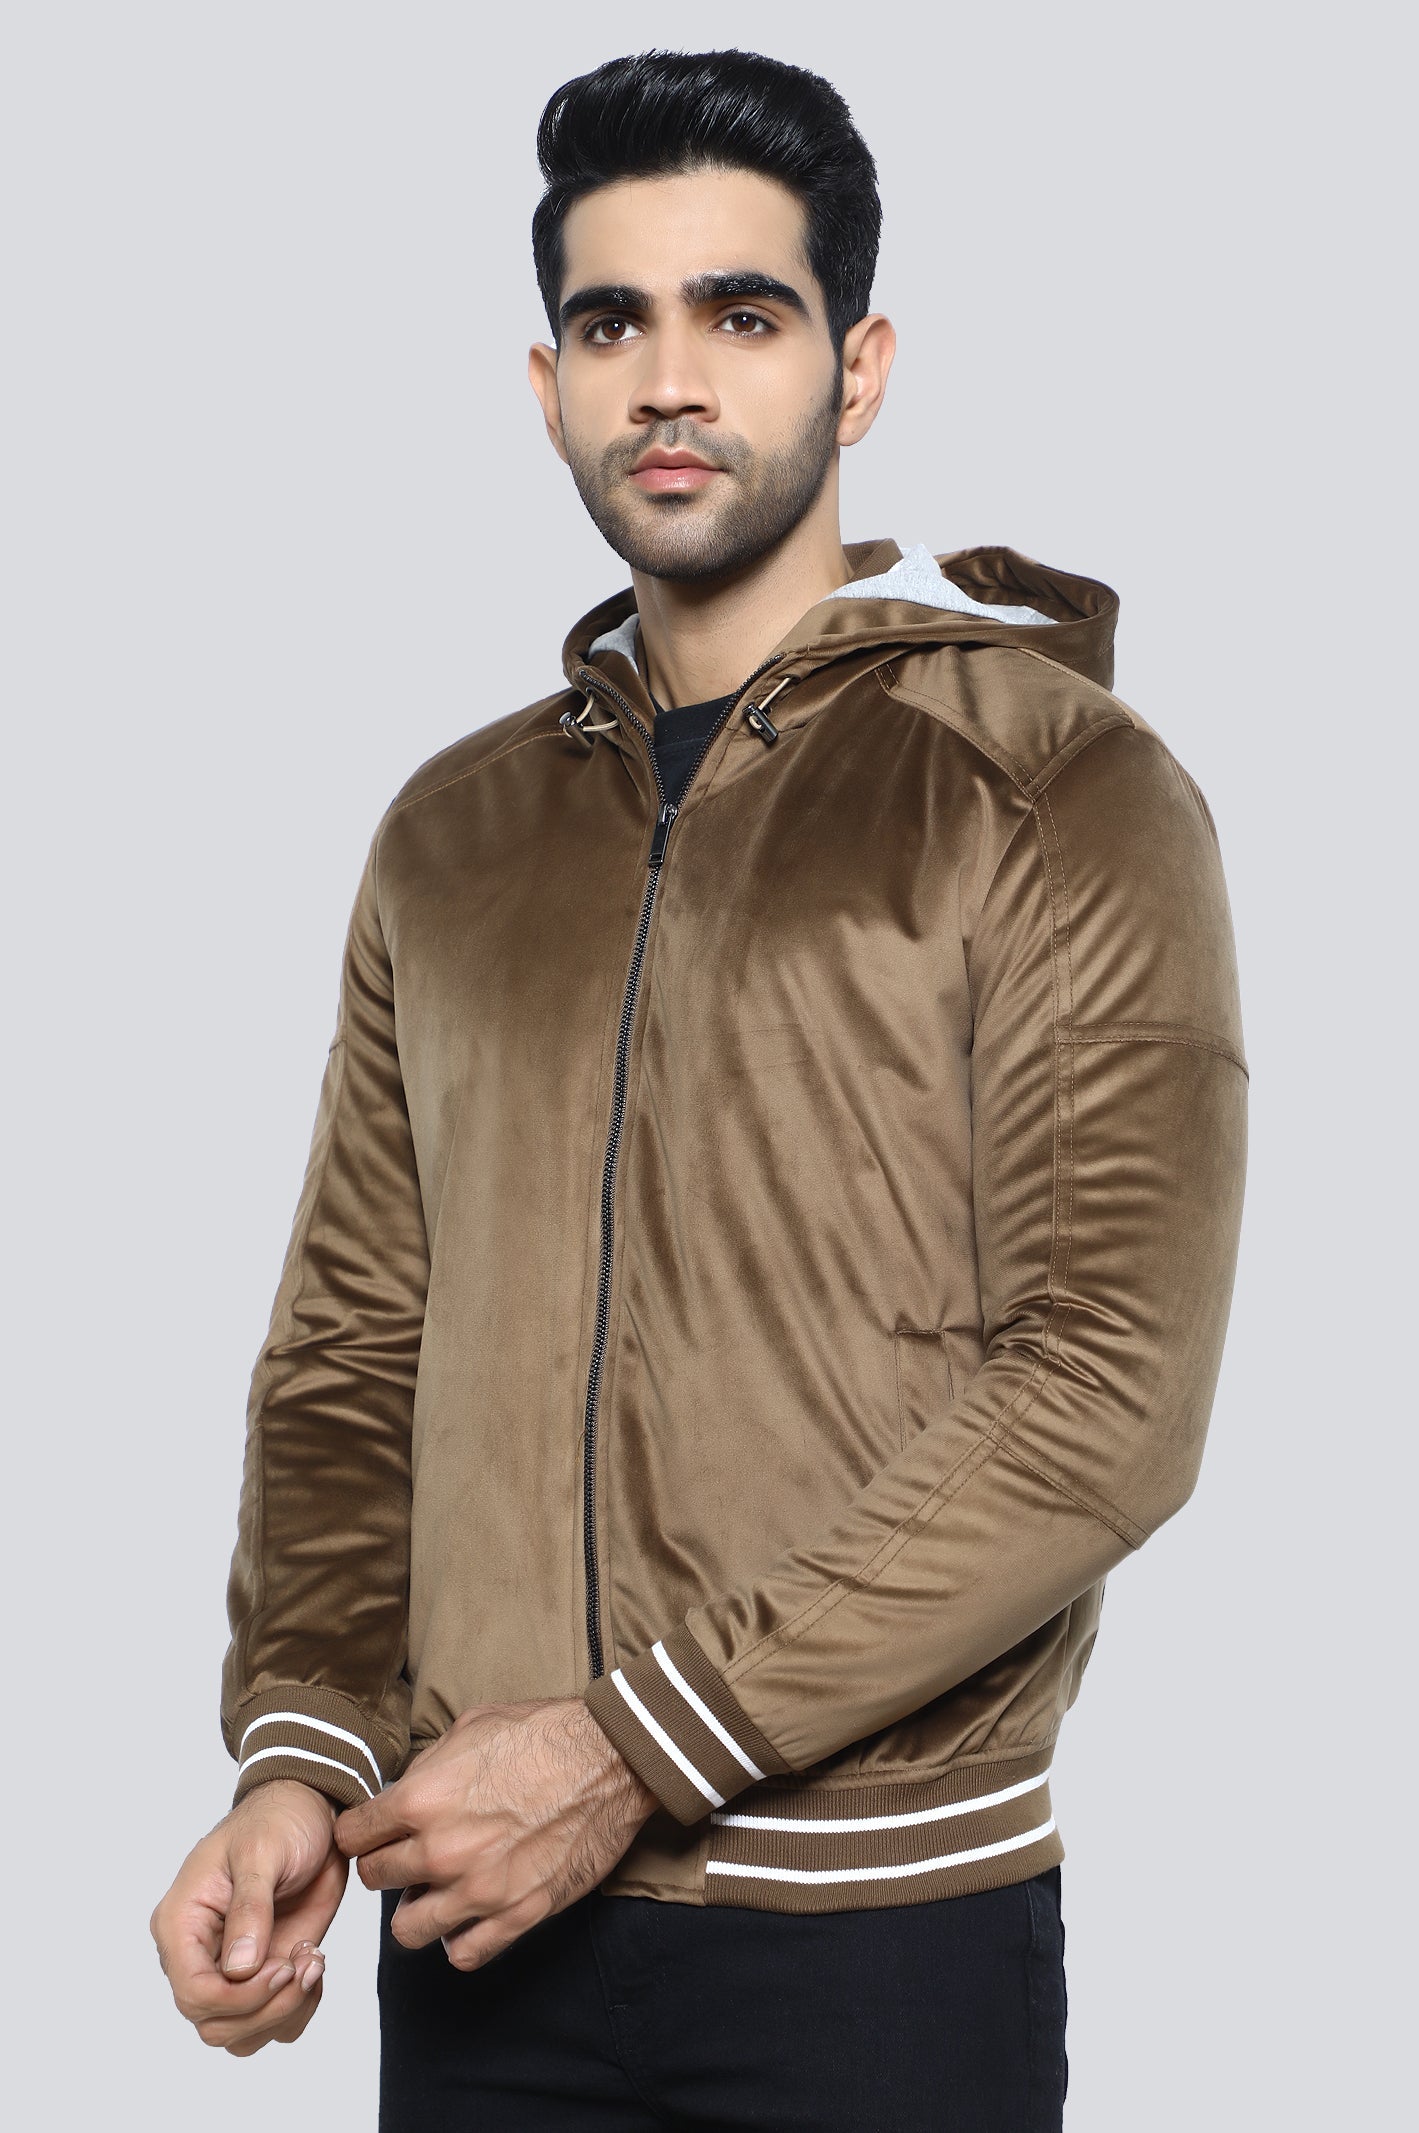 Hoodie For Men's - Diners